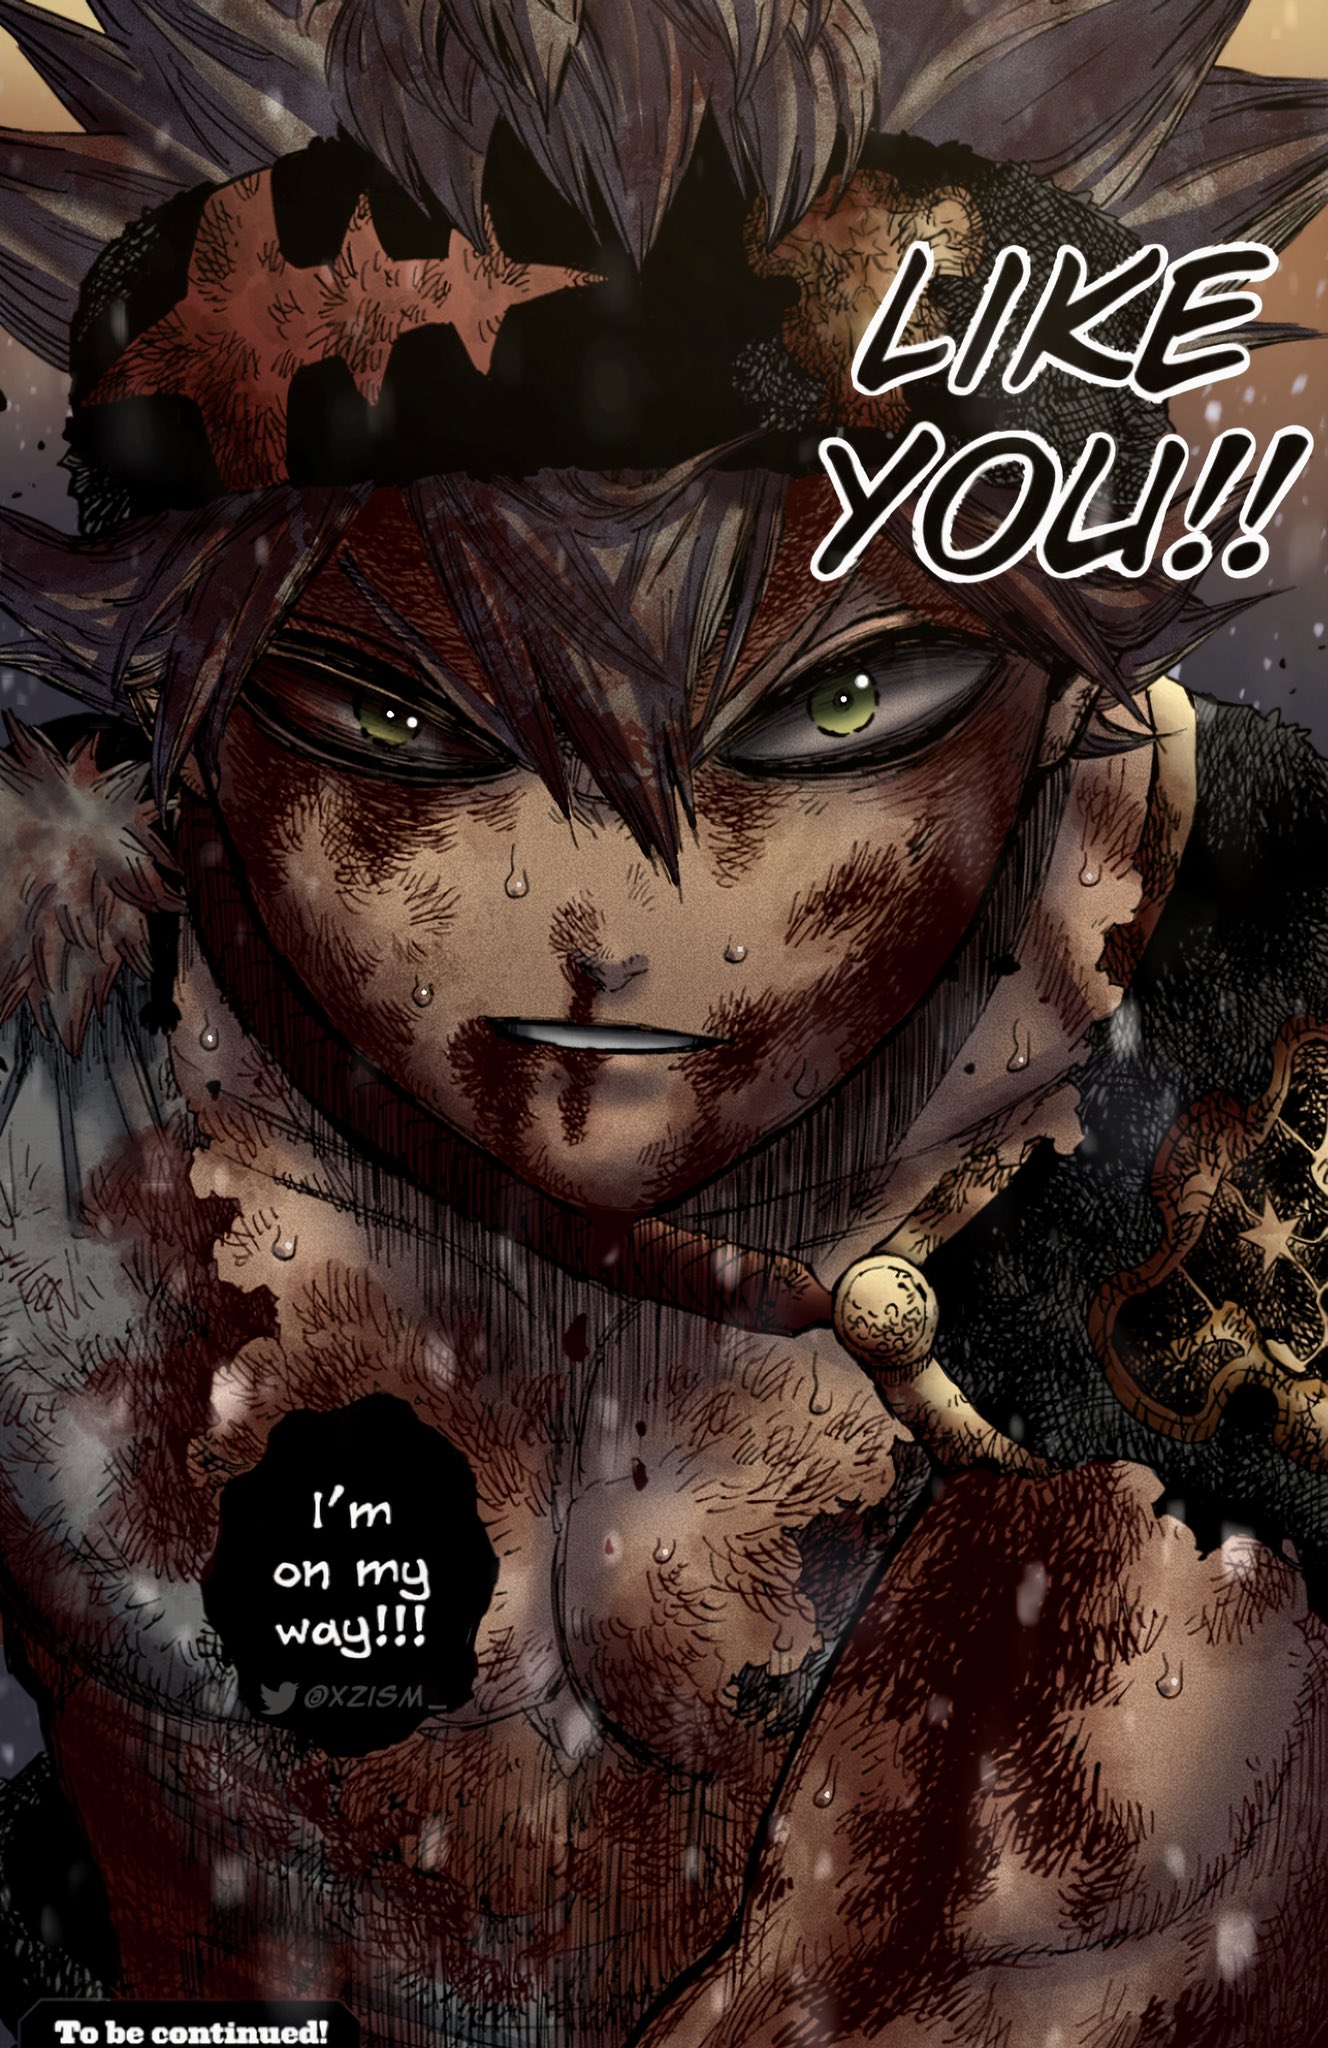 all black clover. — 🌸੭ु•↳ My Asta Edit! What do chu think about